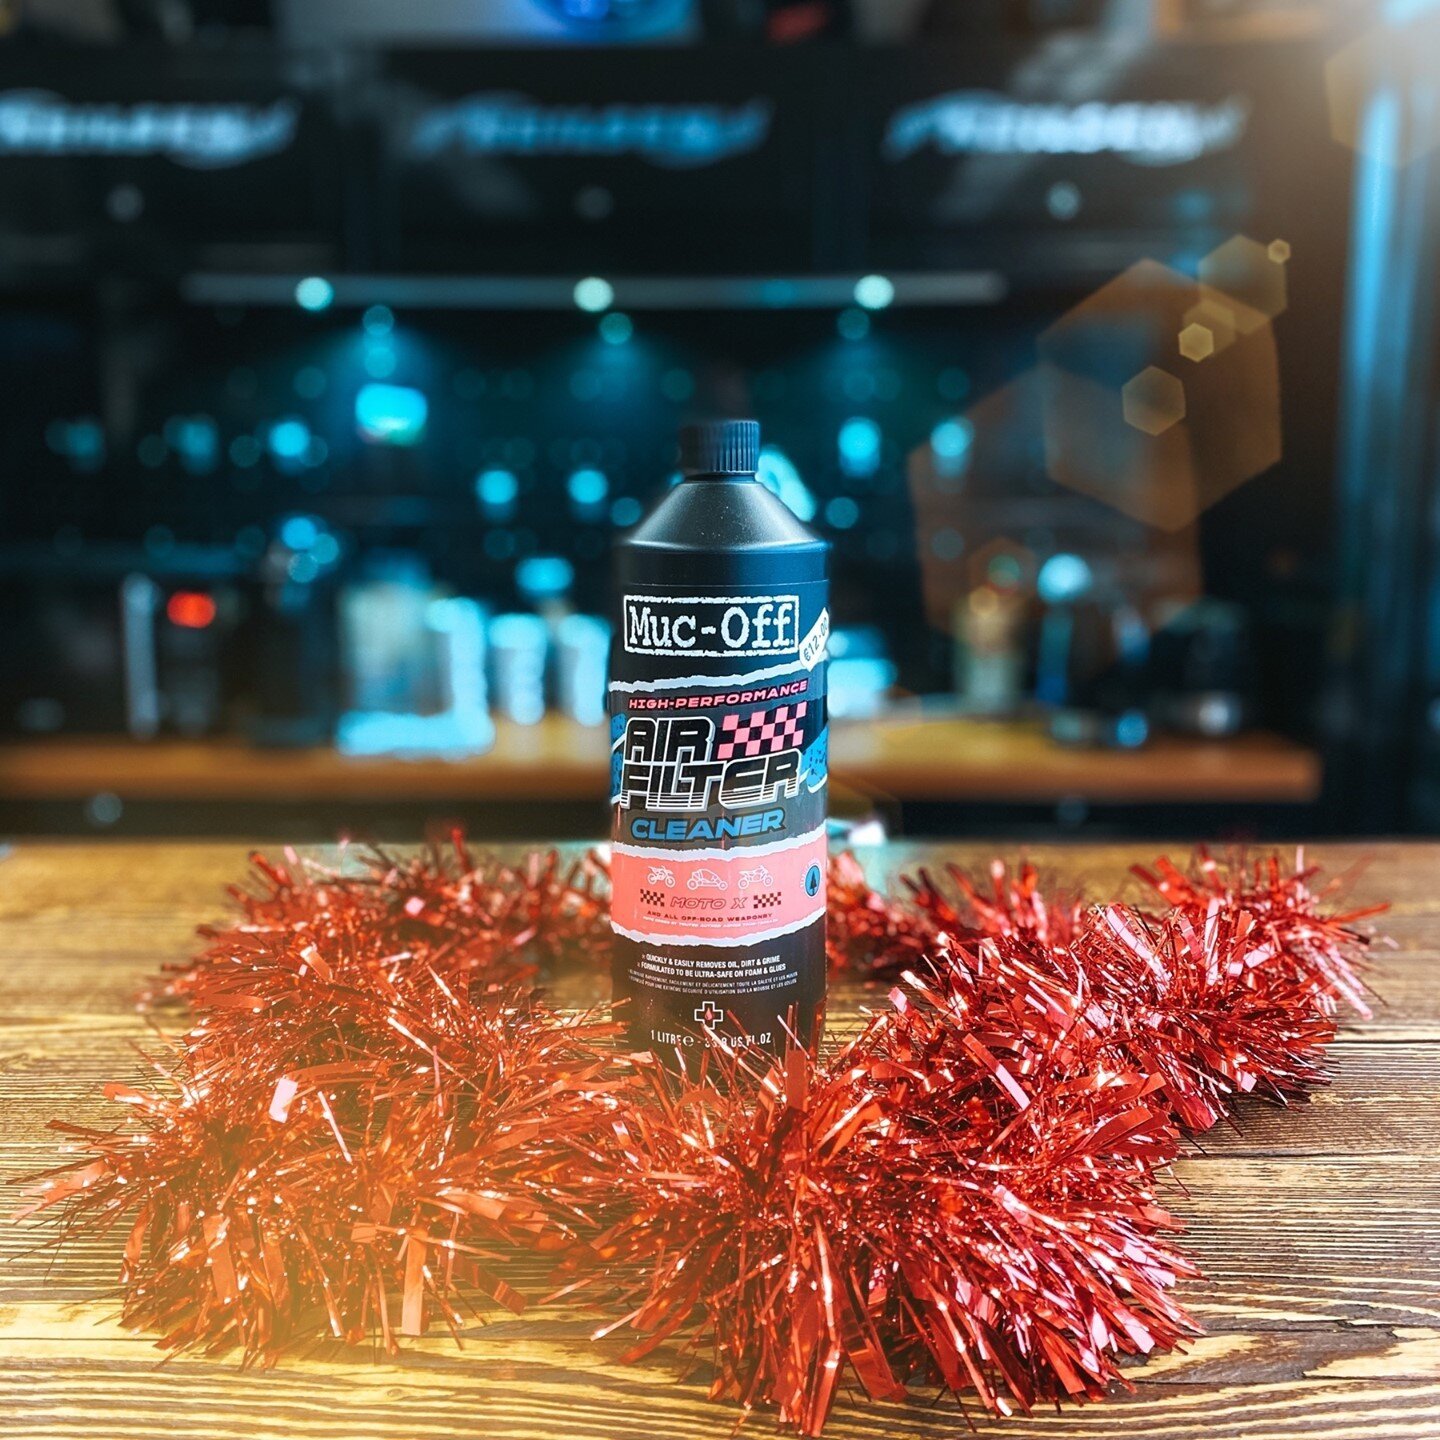 Are you still scrambling for last minute motorcycle gifts?⁠
This Muc-Off Air Filter Cleaner will see you right. ⁠
&euro;12 ⁠
⁠
We're here until 4pm today, 5:30pm on Tuesday and 3pm on Wednesday...then we're outta here to start our own Christmas shopp